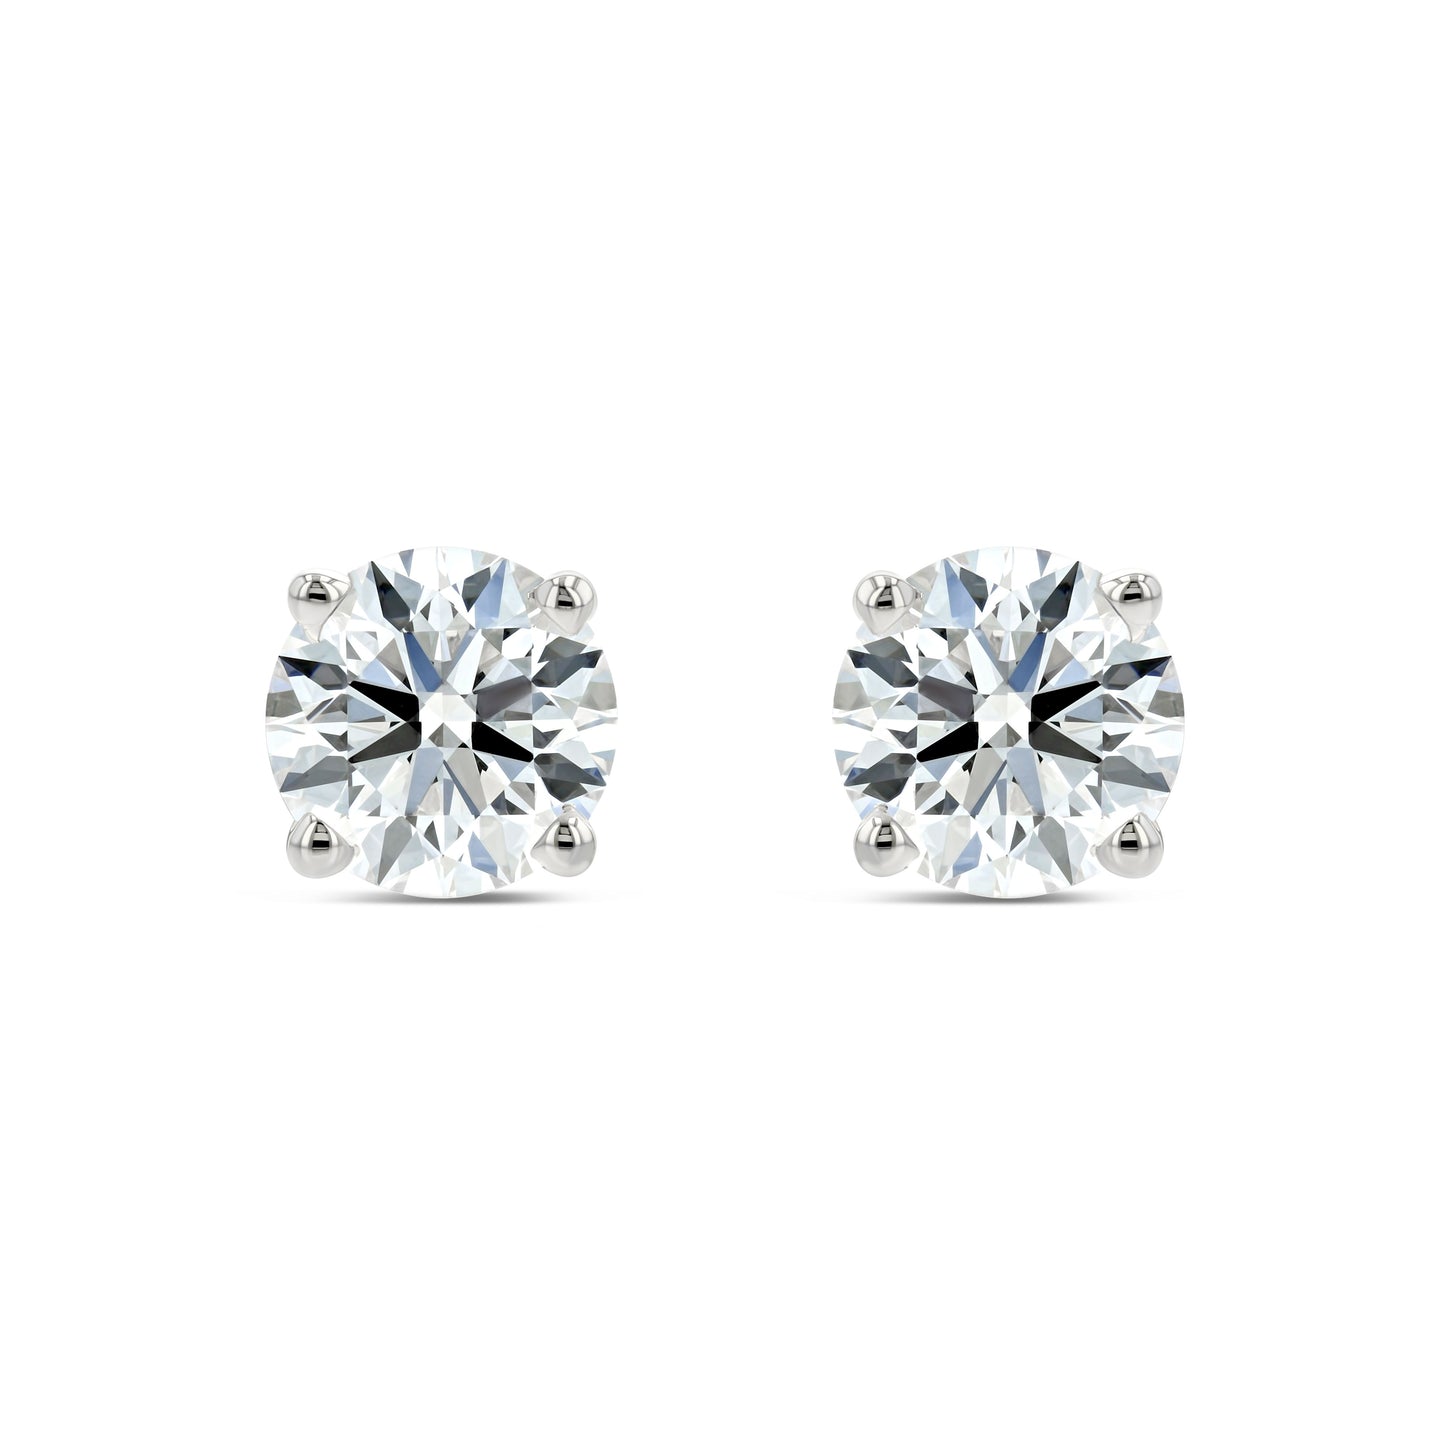 18k White Gold 4-prong Round Diamond Stud Earrings 1/2ctw (4.0mm Ea), G-h Color, I1 Clarity